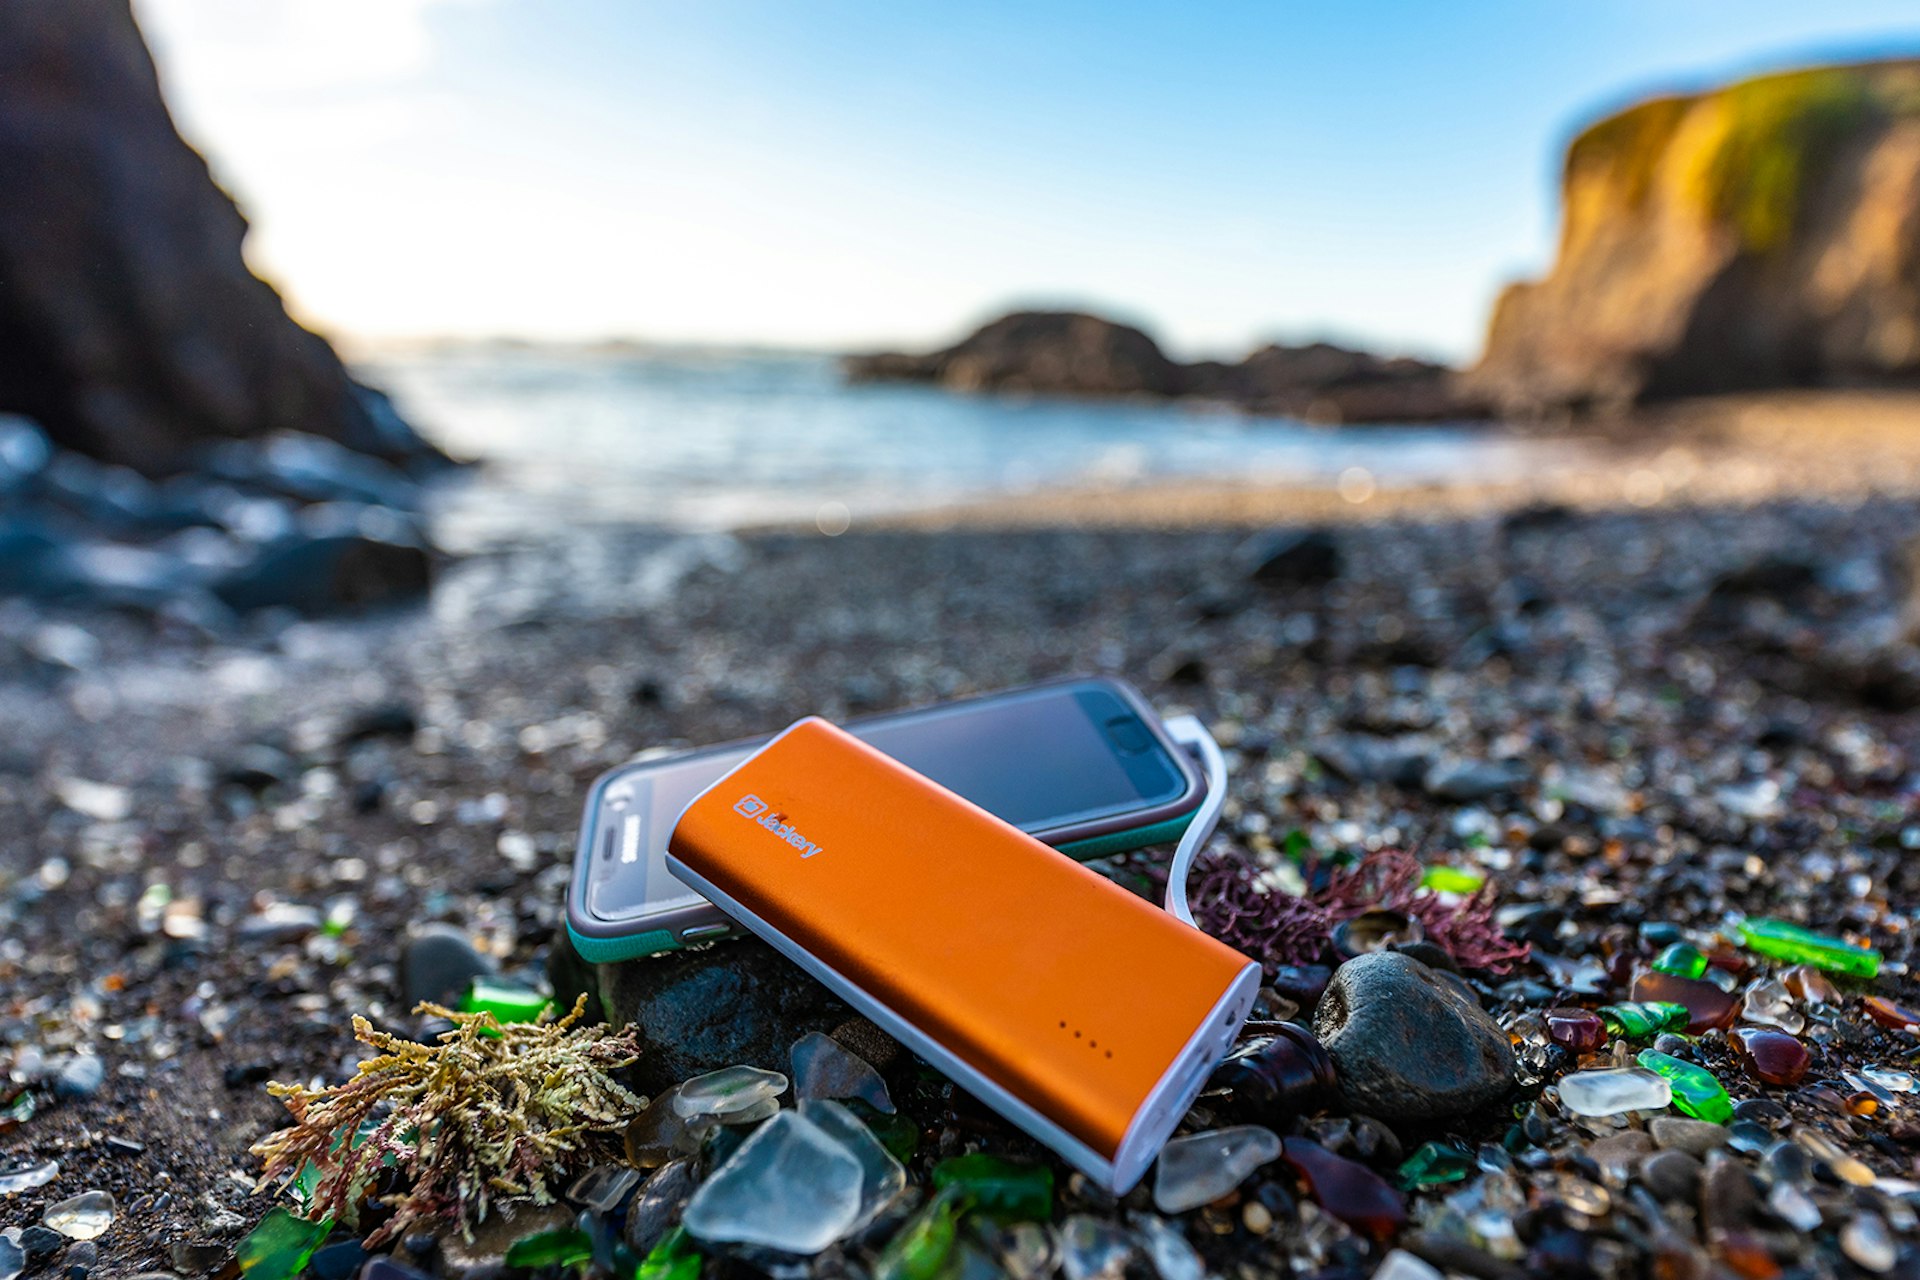 Product shot of the Jackery’s Bolt 6000 and a smartphone. The focus is on the orange charger and the beach which is littered with cut glass. The blurry sea and cliffs are visible in the background; Father's Day gifts